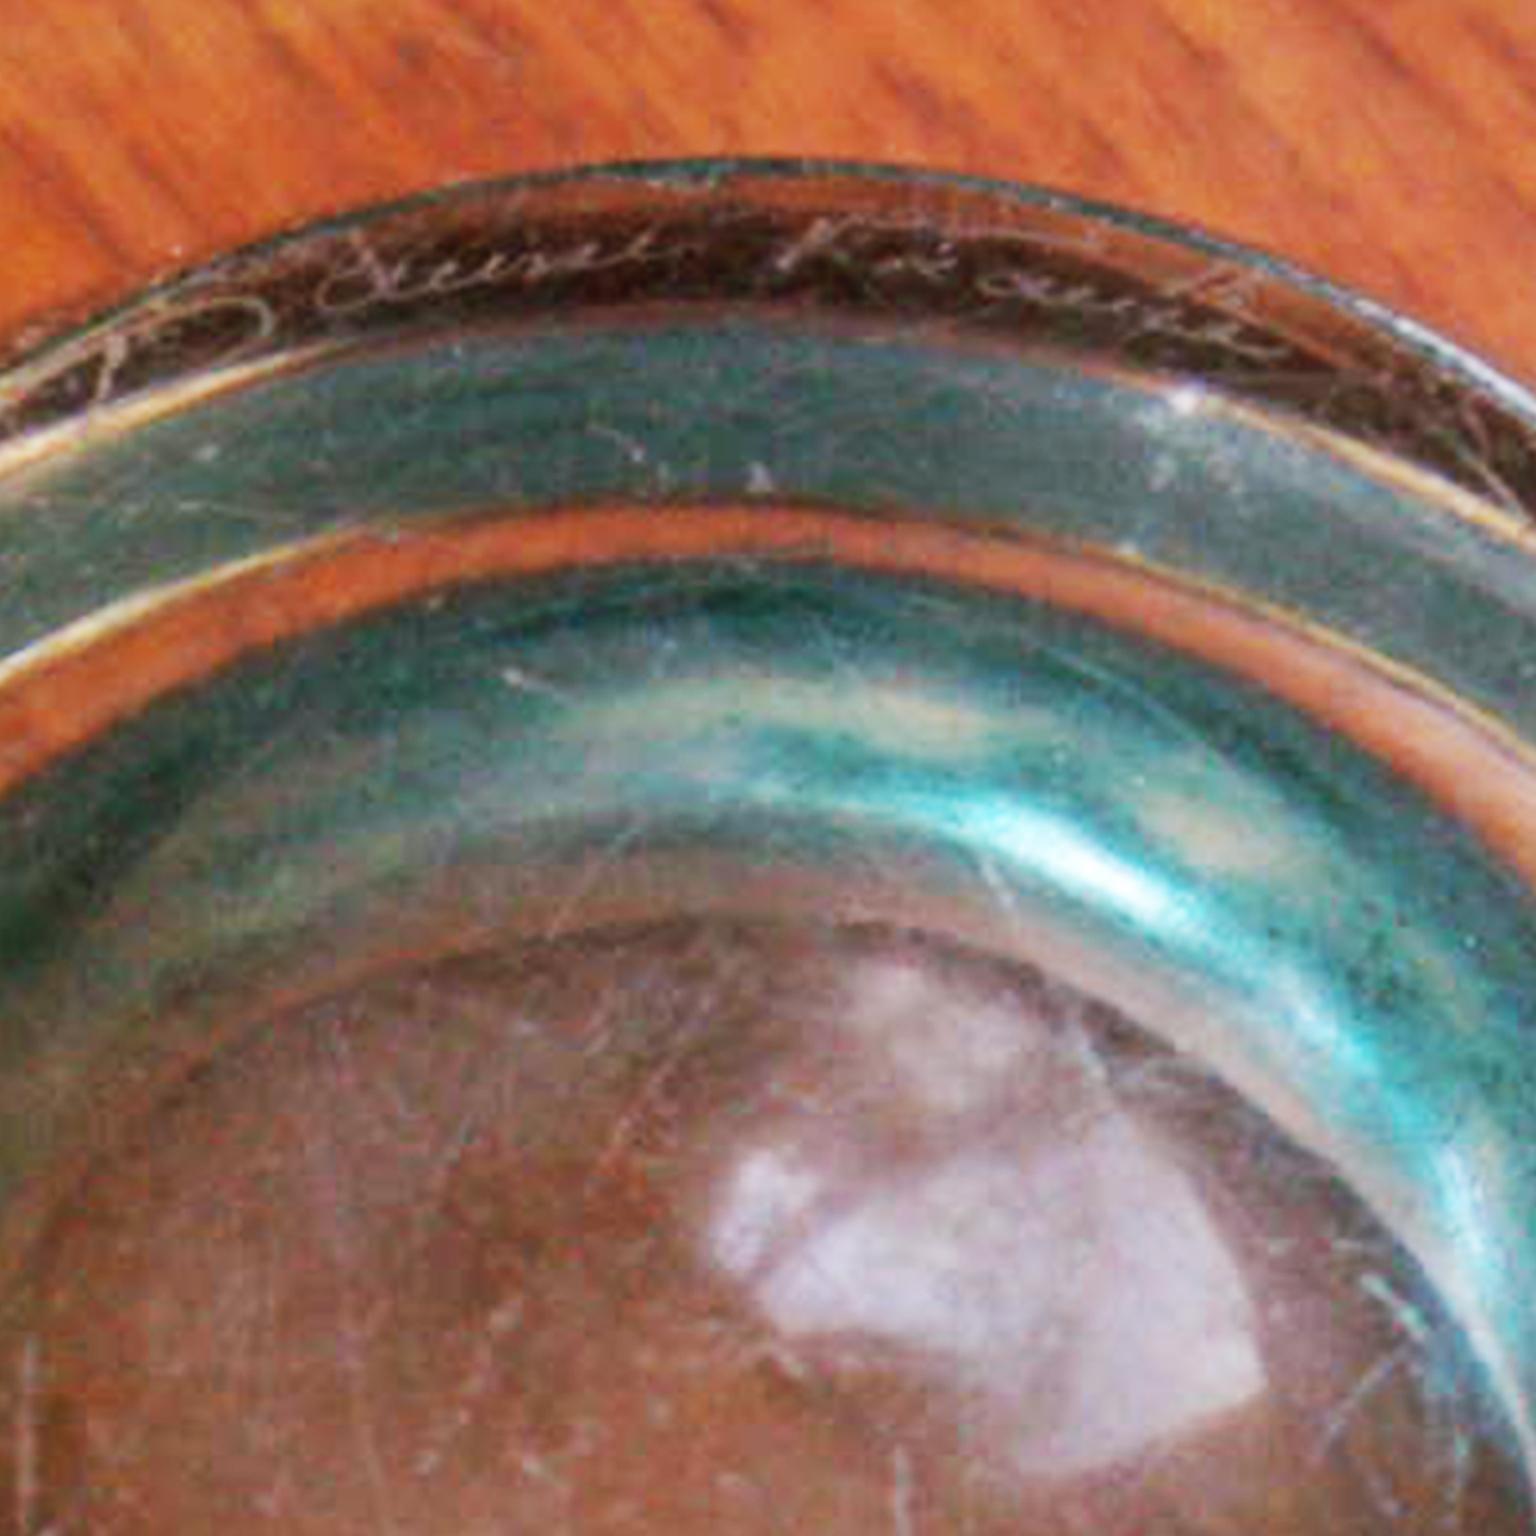 Heavy glass bowl by Daum with a delicate thin layer of glass with blue and green touches.
Signed Daum on the base
Year 1960
Measures: H about 5 cm
Diameter about 11.2 cm
Diameter of the base about 7.2 cm.
Daum is a crystal studio based in